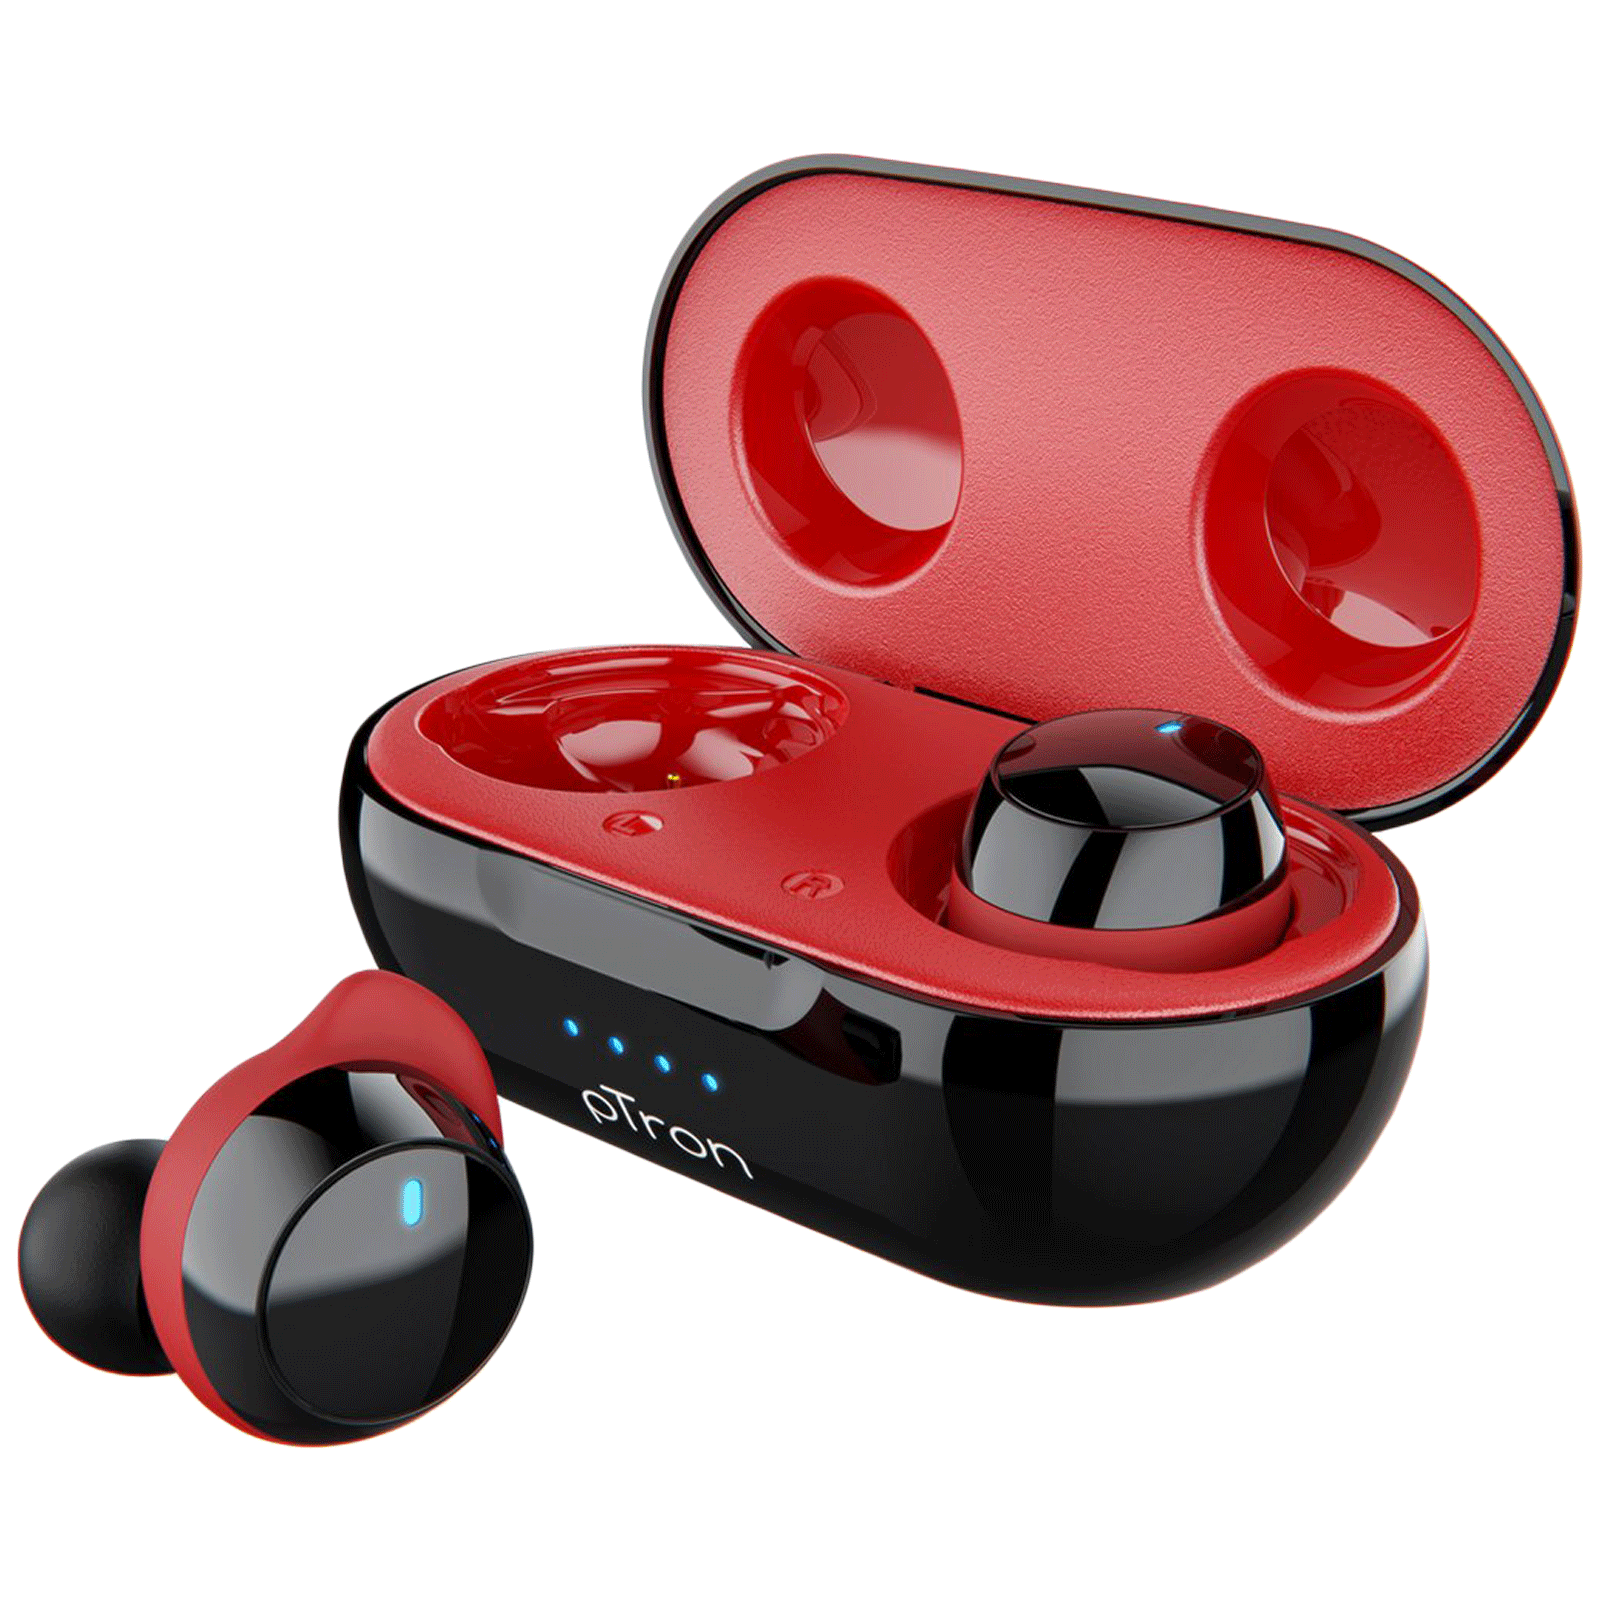 pTron Bassbuds Evo 140317860 In-Ear Passive Noise Cancellation Truly Wireless Earbuds with Mic (Bluetooth 5.0, 8mm Dynamic Driver, Black/Red)_1